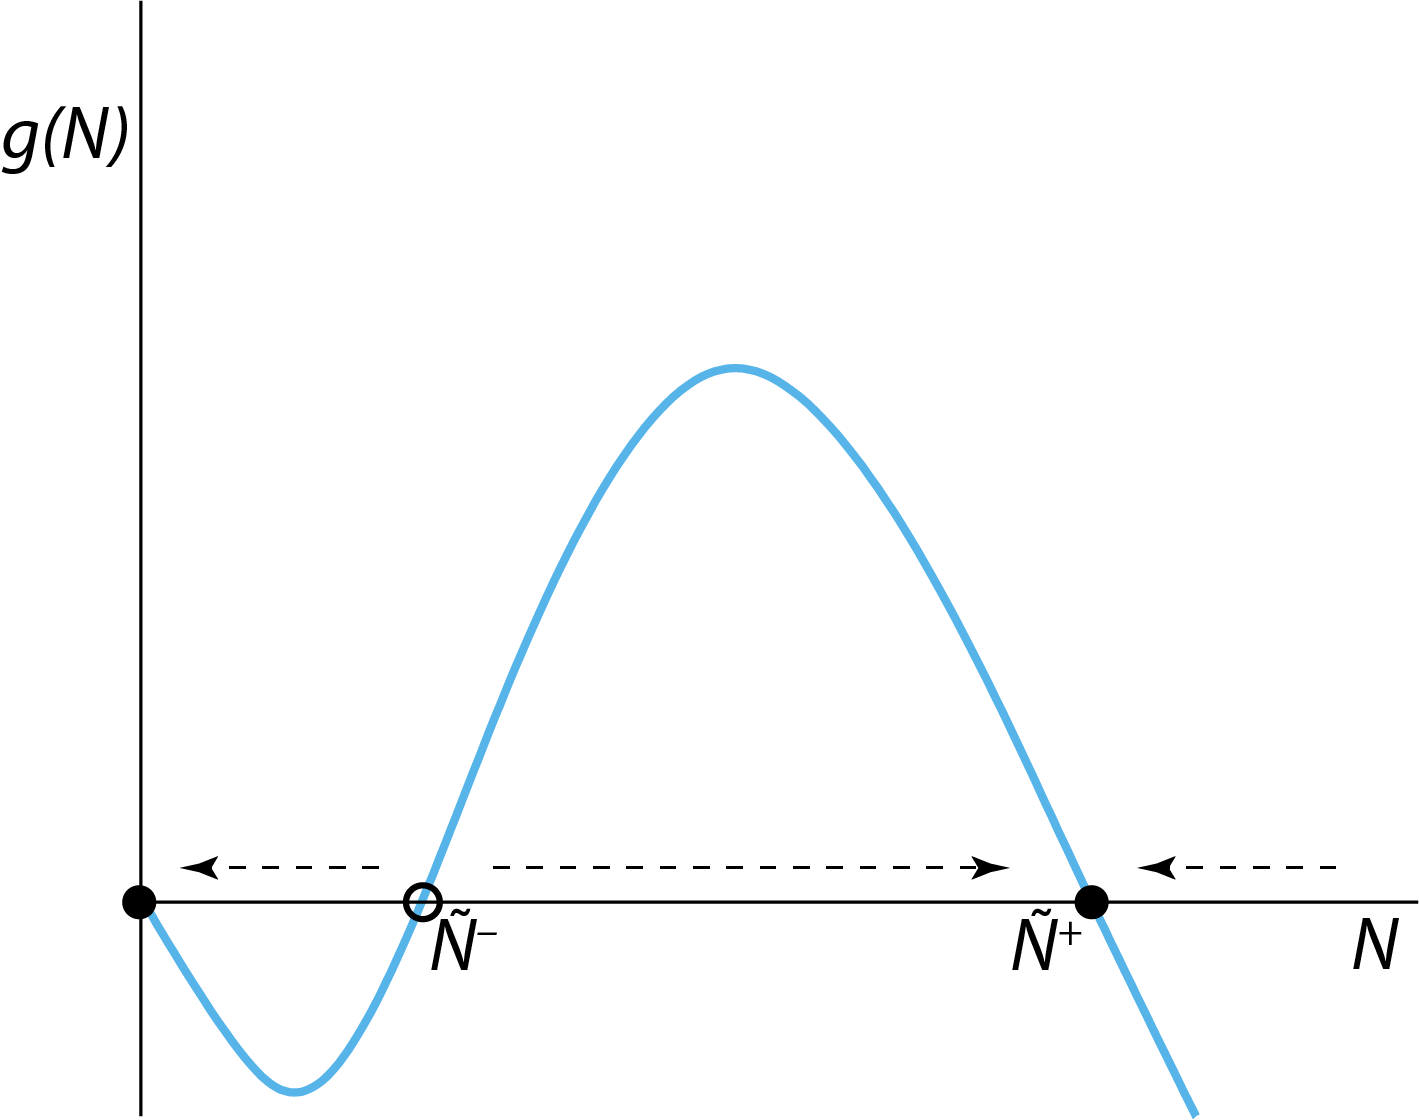 The right-hand side $g(N)$ of the ODE describing the dynamics of the two-sexes population growth model. The horizontal arrows indicate for which values of $N$ the population growth rate is negative (left-pointing arrows) and positive (right-pointing arrows) and the population abundance $N$ will therefore decrease or increase over time. The open circle indicates the unstable steady state $N=\tilde{N}^{-}$, closed circles indicate the stable steady states $N=0$ and $N=\tilde{N}^{+}$.